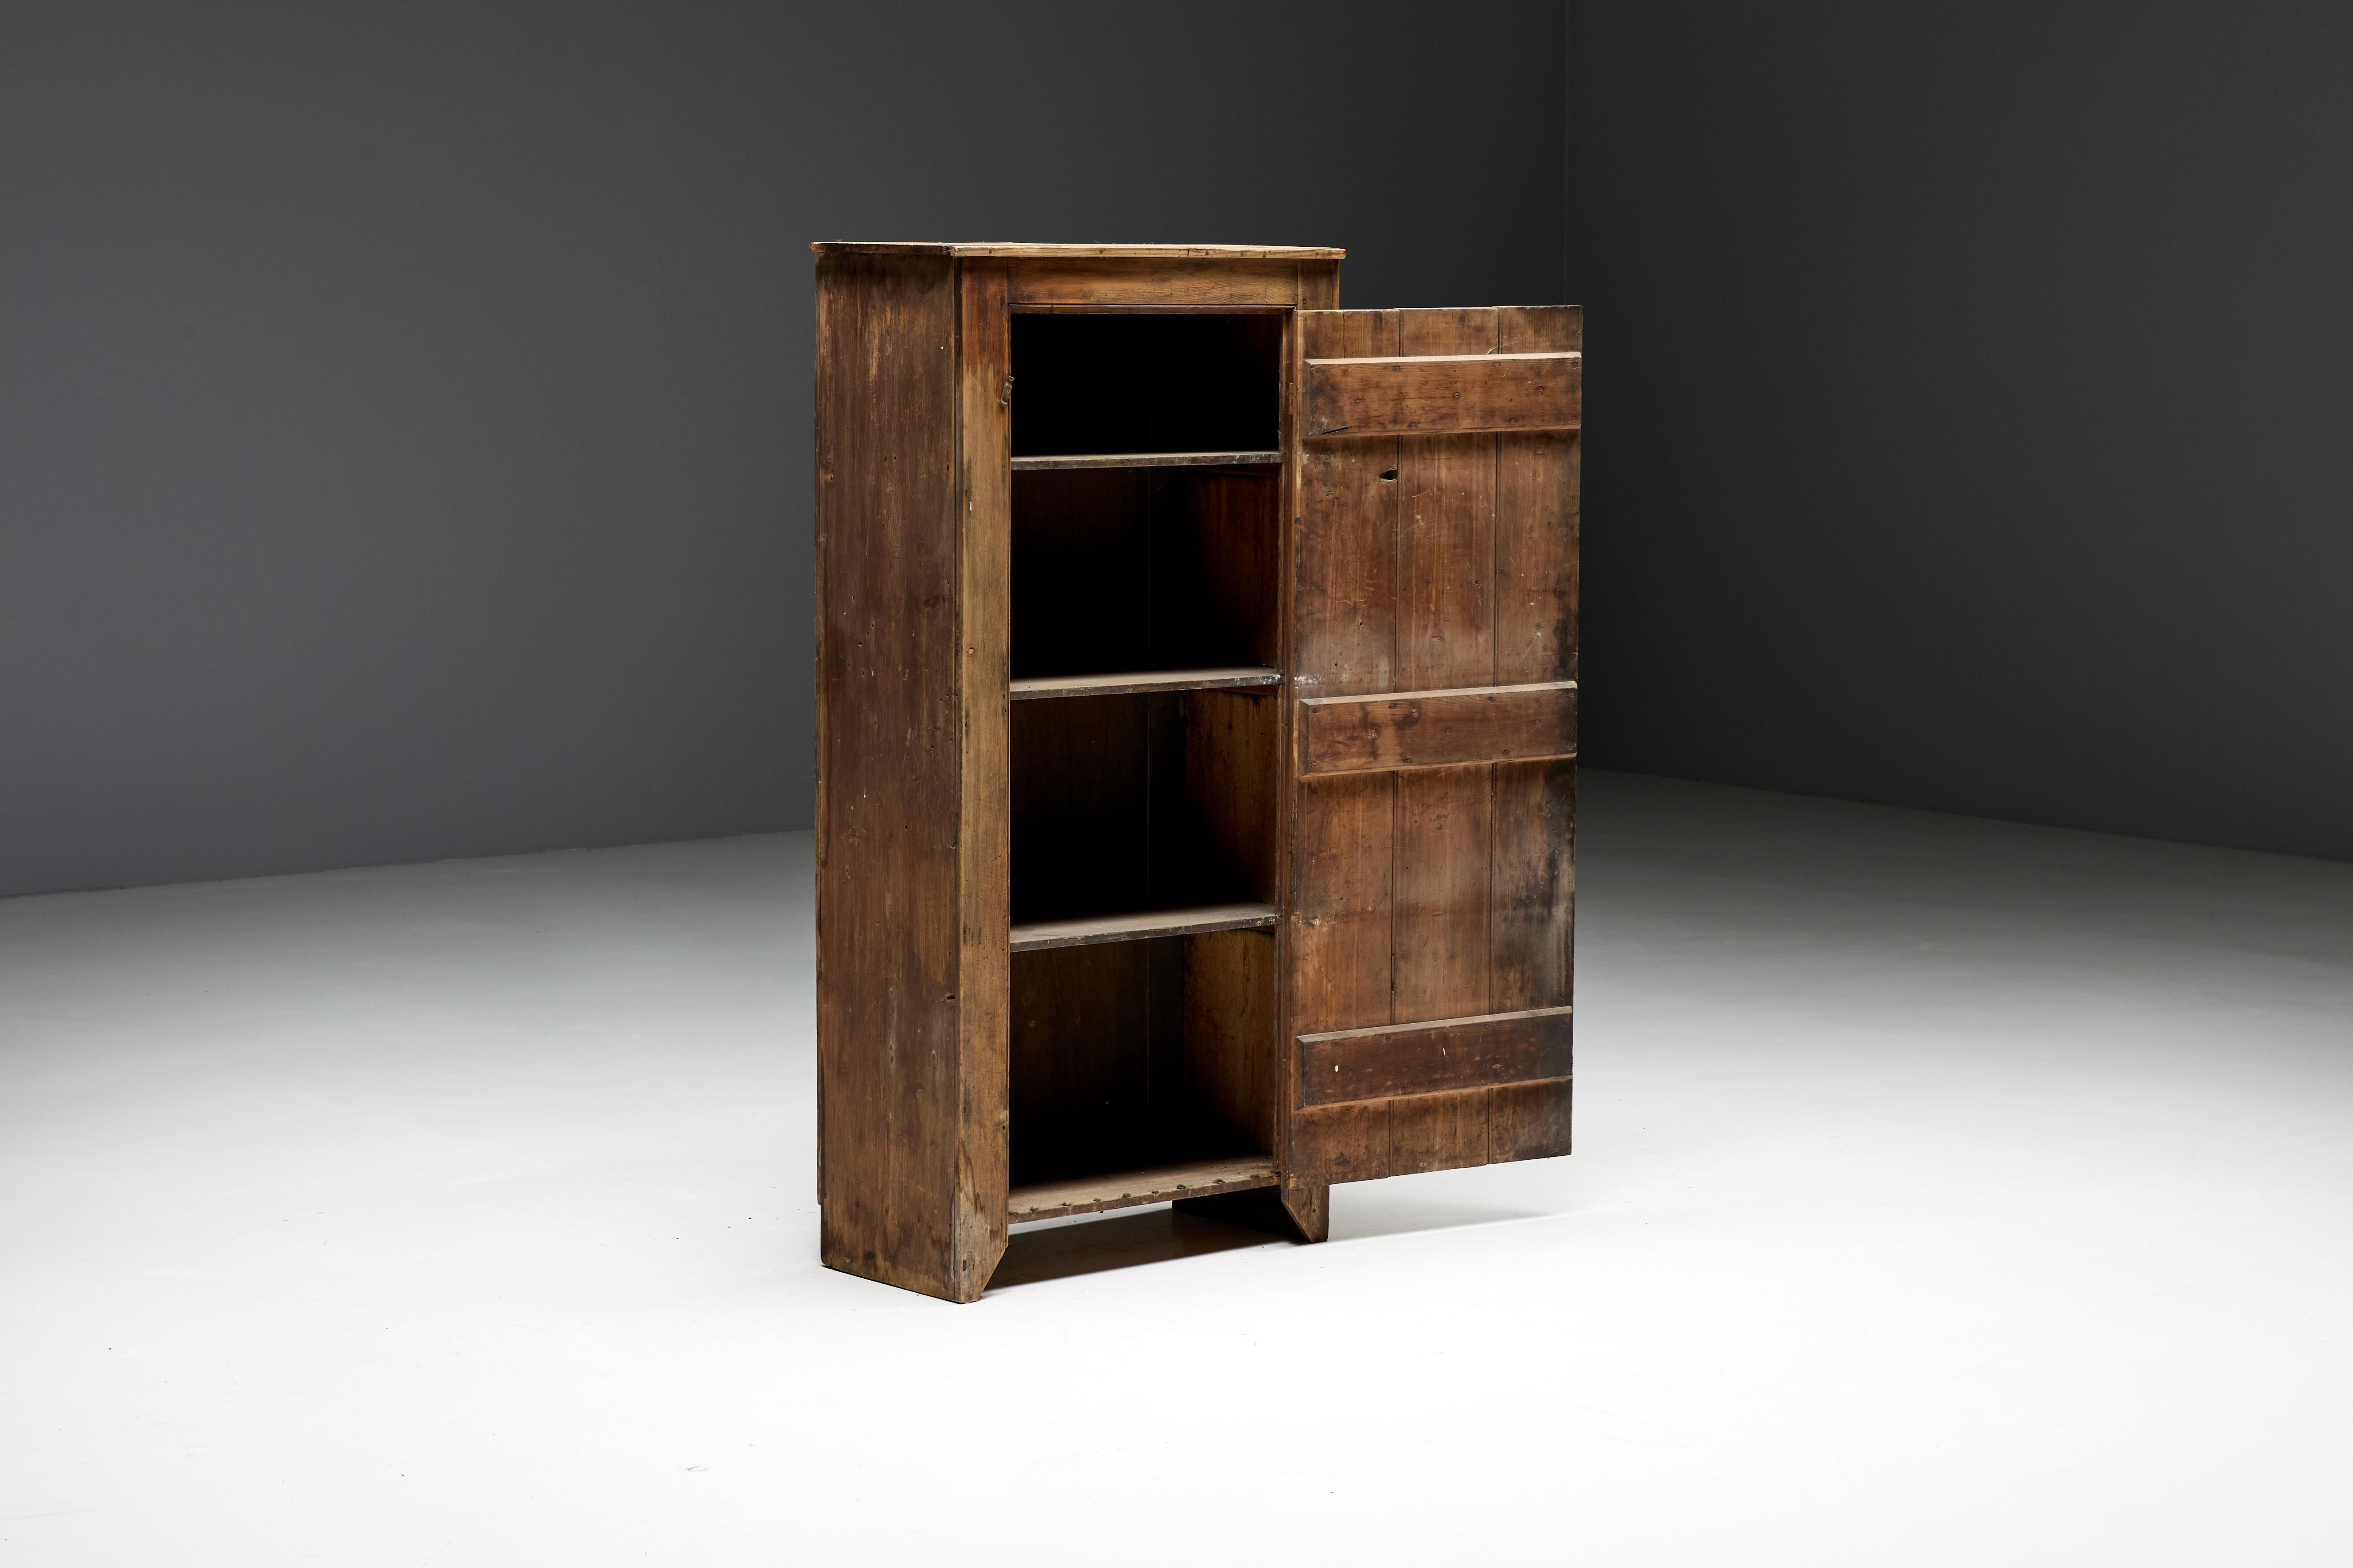 Wood Rustic Travail Populaire Cabinet, France, 19th Century For Sale